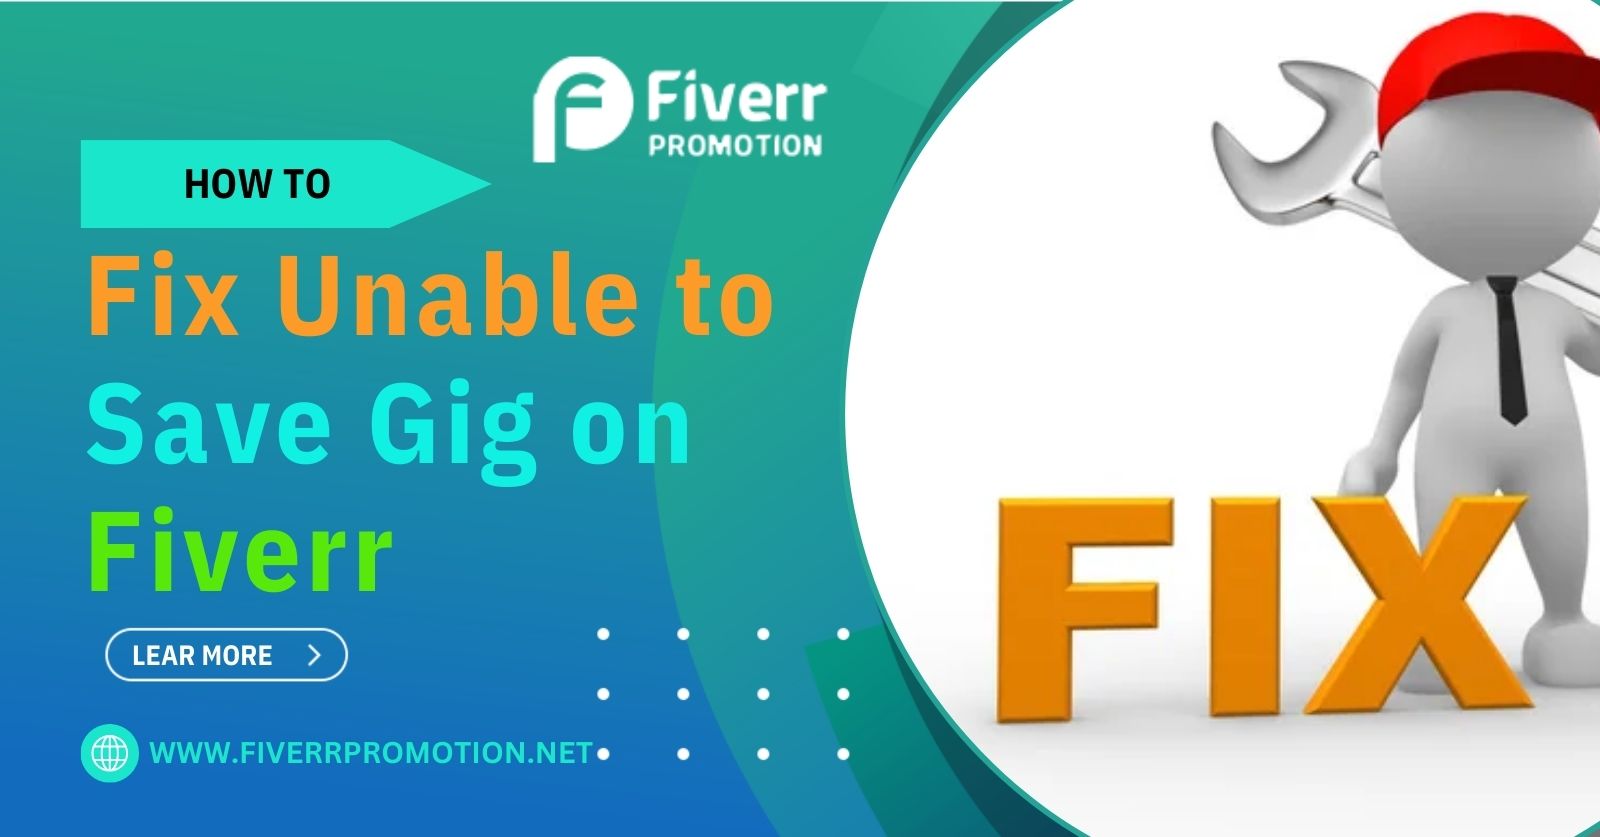 How to Fix Unable to Save Gig on Fiverr